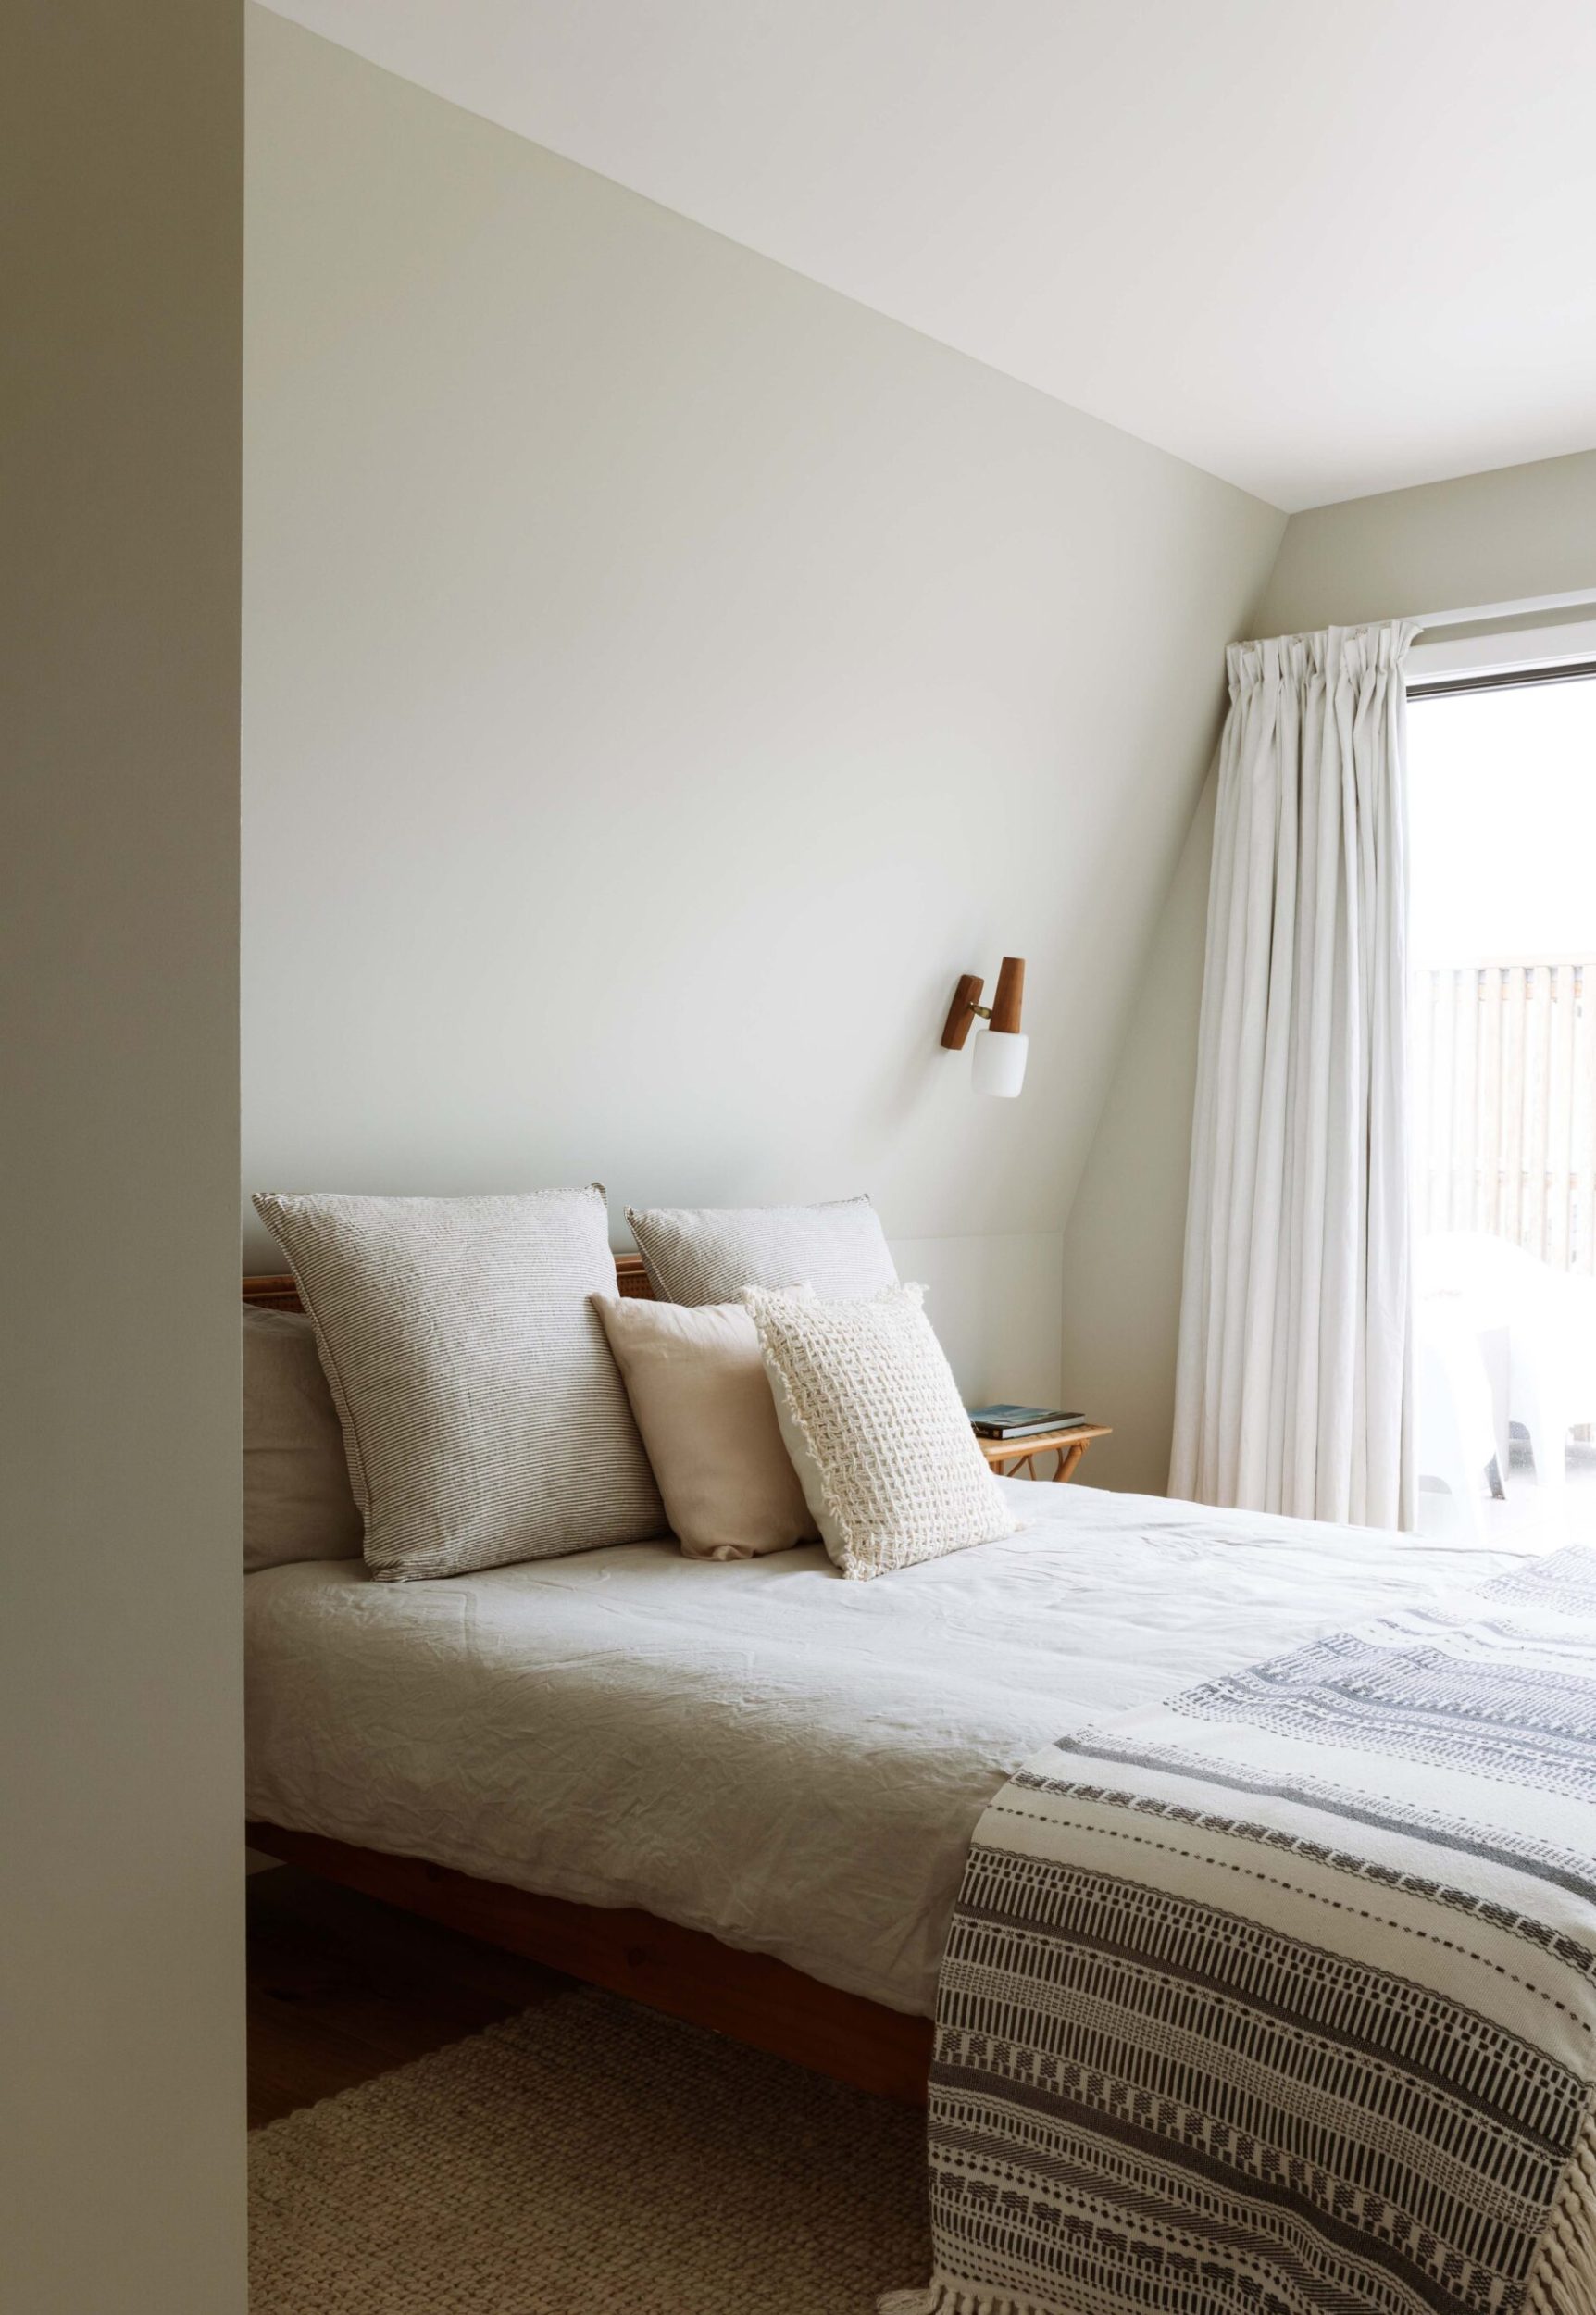 A neutral bedroom with neutral bed linen